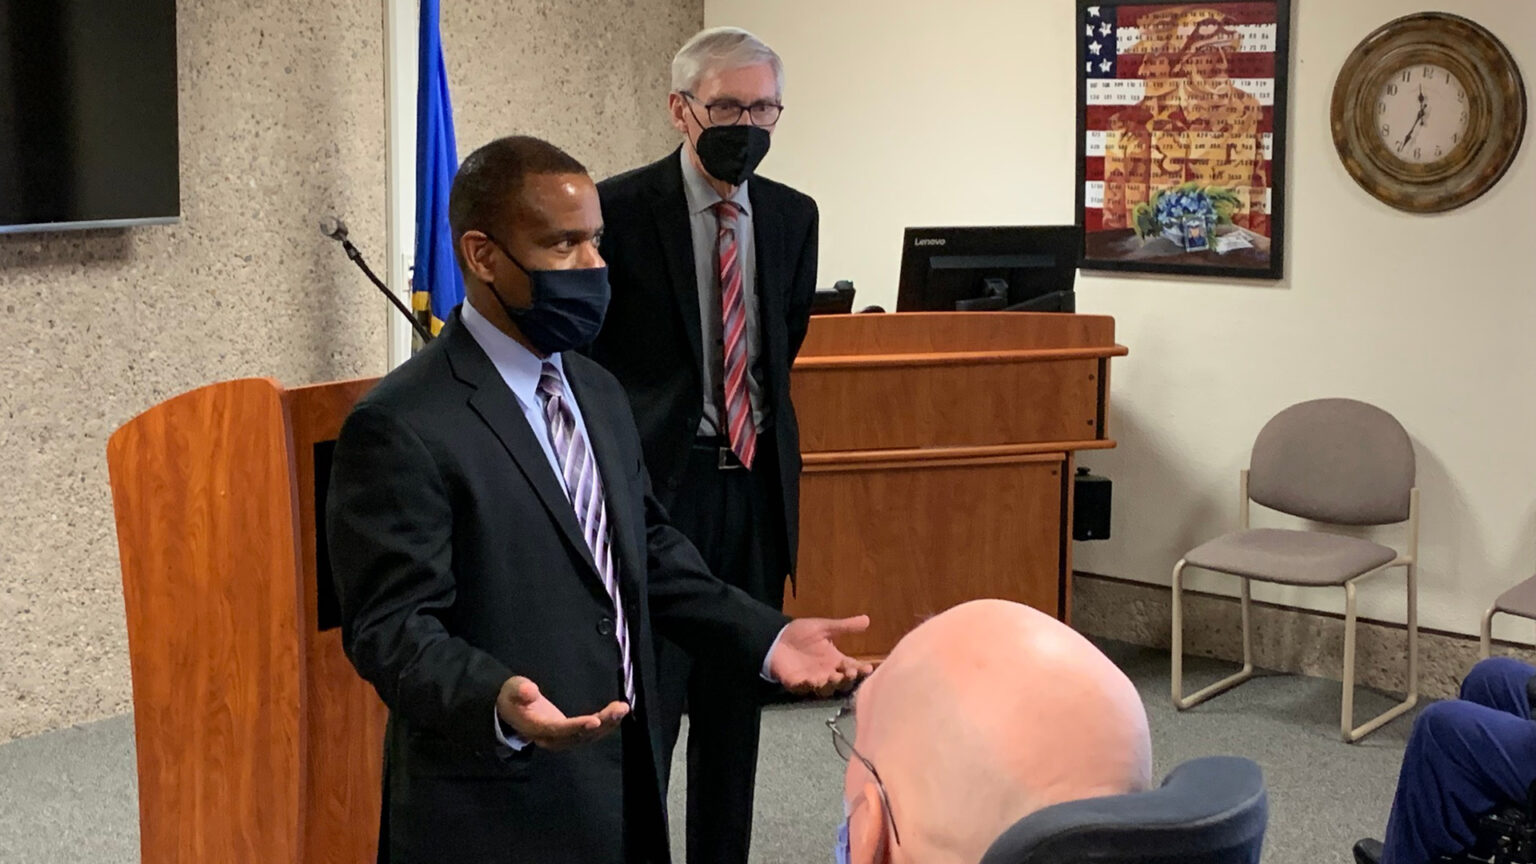 James Bond speaks in front of a podium to veterans in a meeting room while gesturing with both hands and wearing a cloth face mask, with Tony Evers standing in the background and wearing a face mask, with a video monitor, Wisconsin flag, desk, chairs, clock and veterans-themed poster in the background.